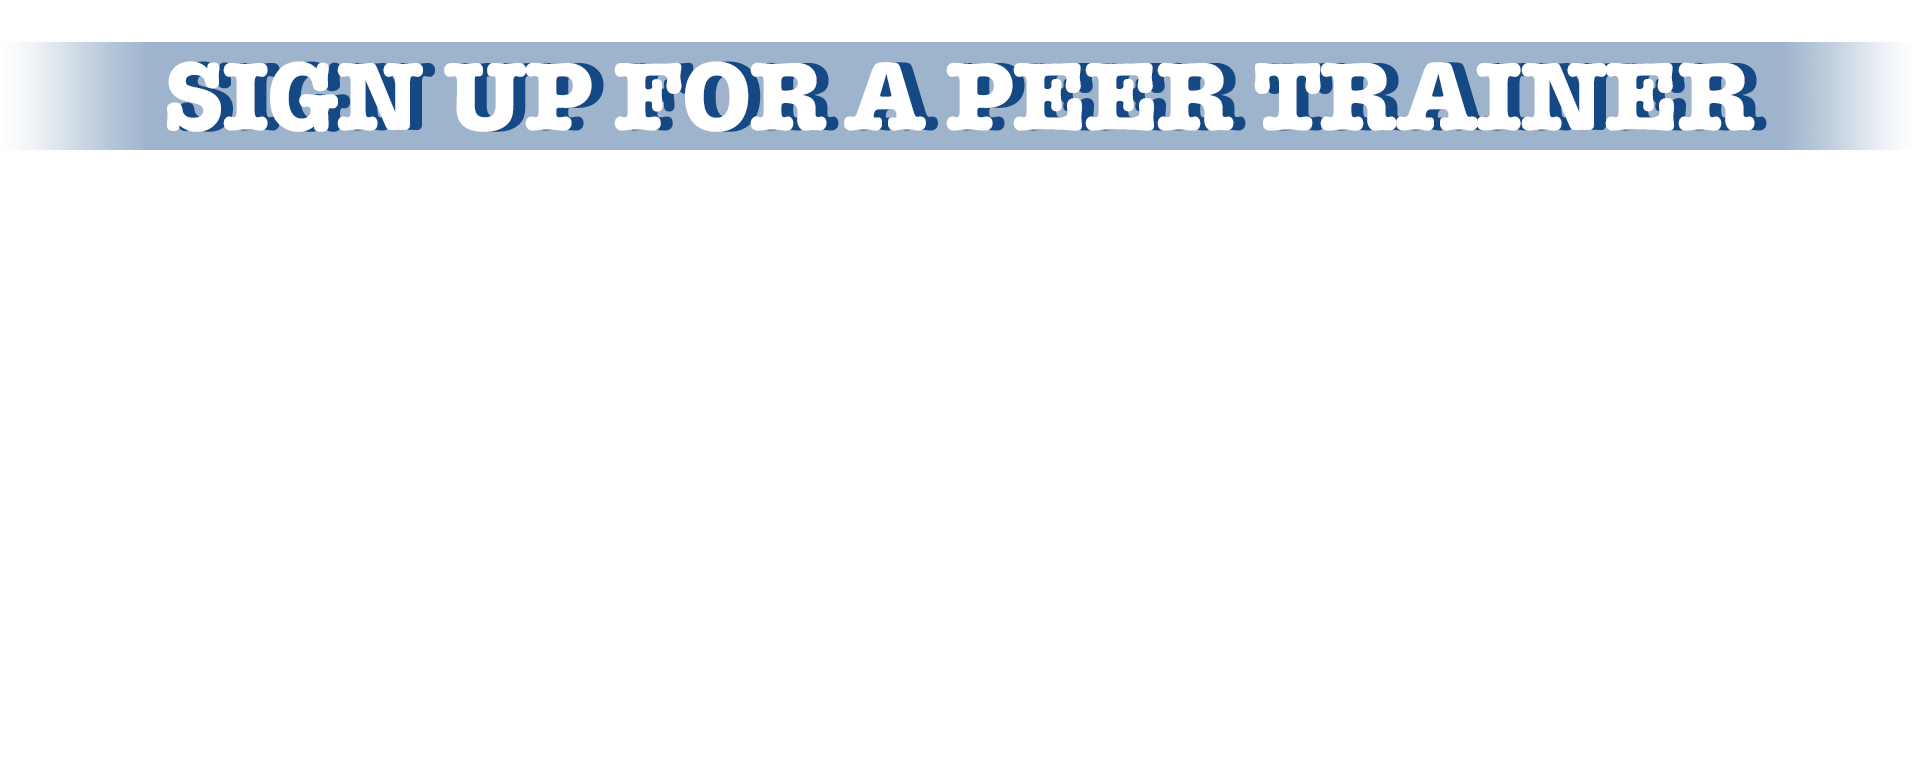 Text ID: Sign Up For A Peer Trainer